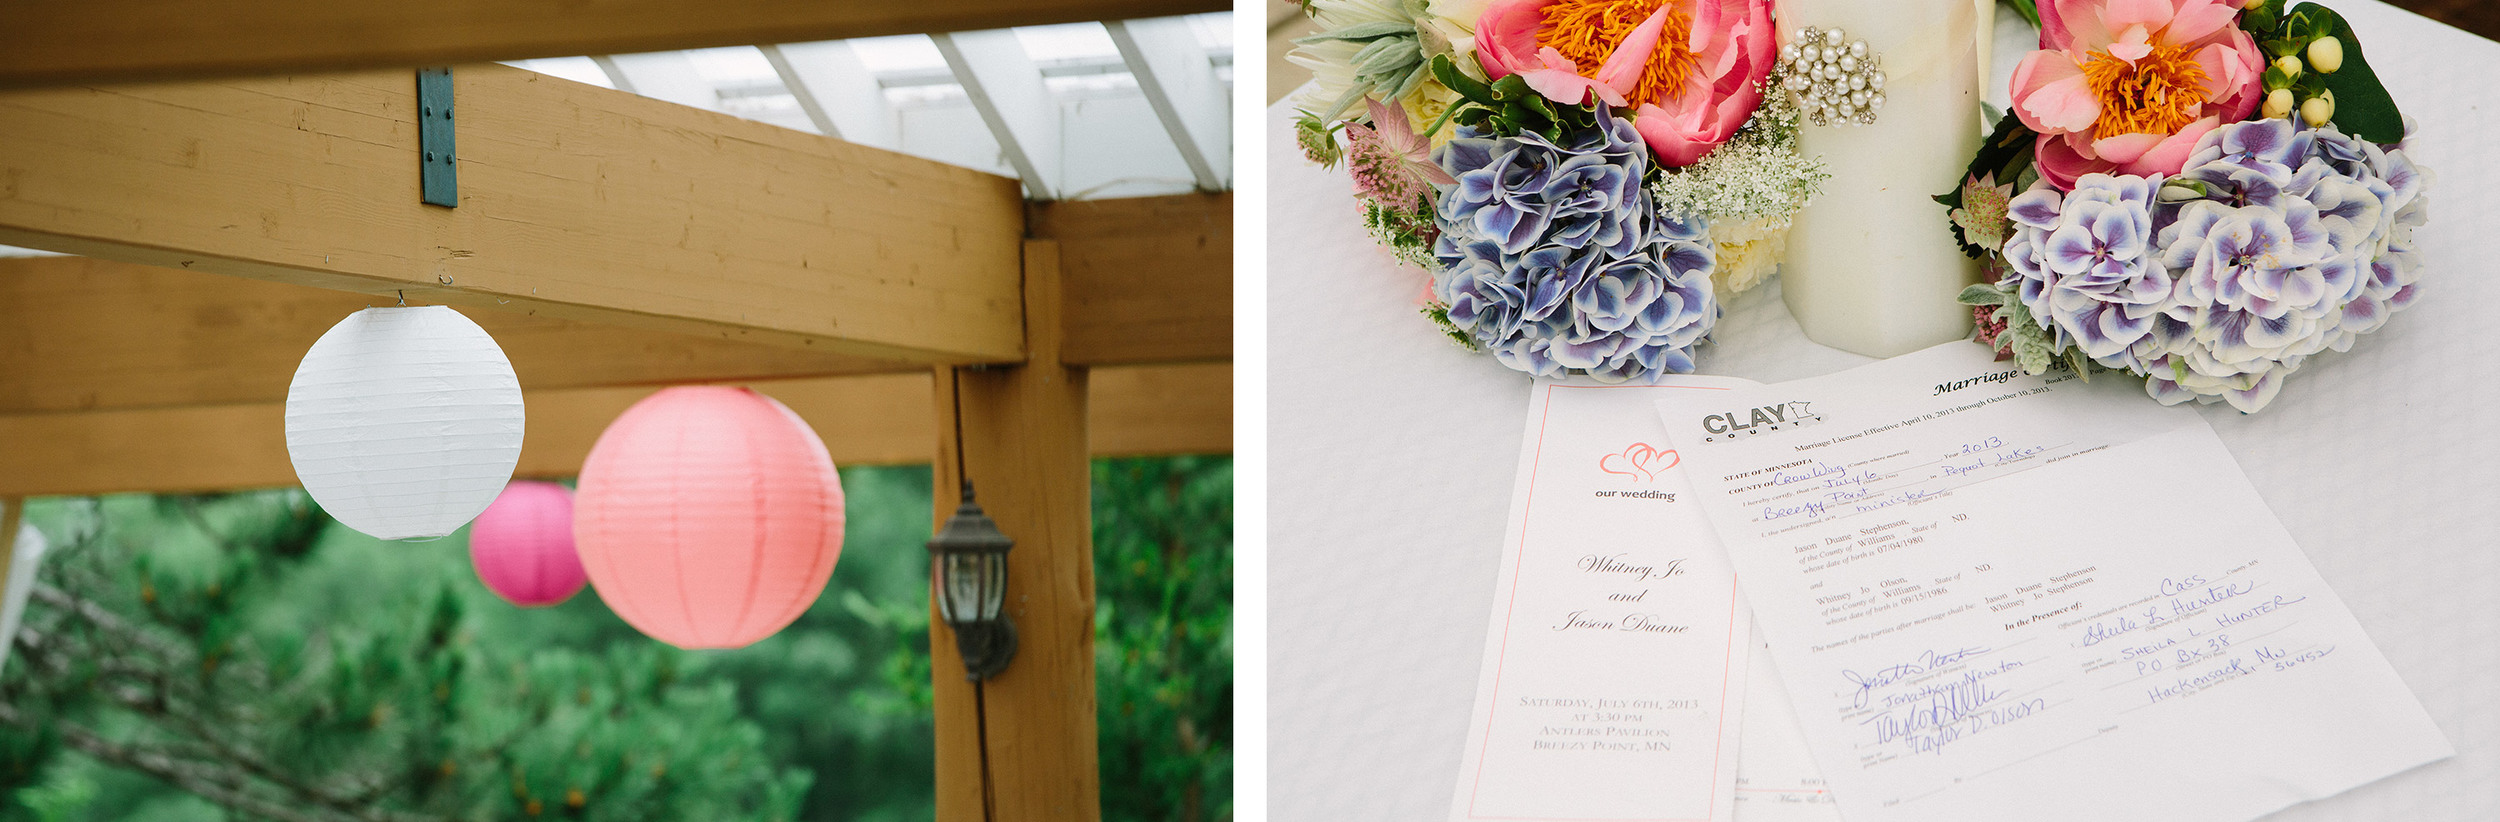 Breezy Point's Antler's Pavilion Wedding and White Birch Room Reception